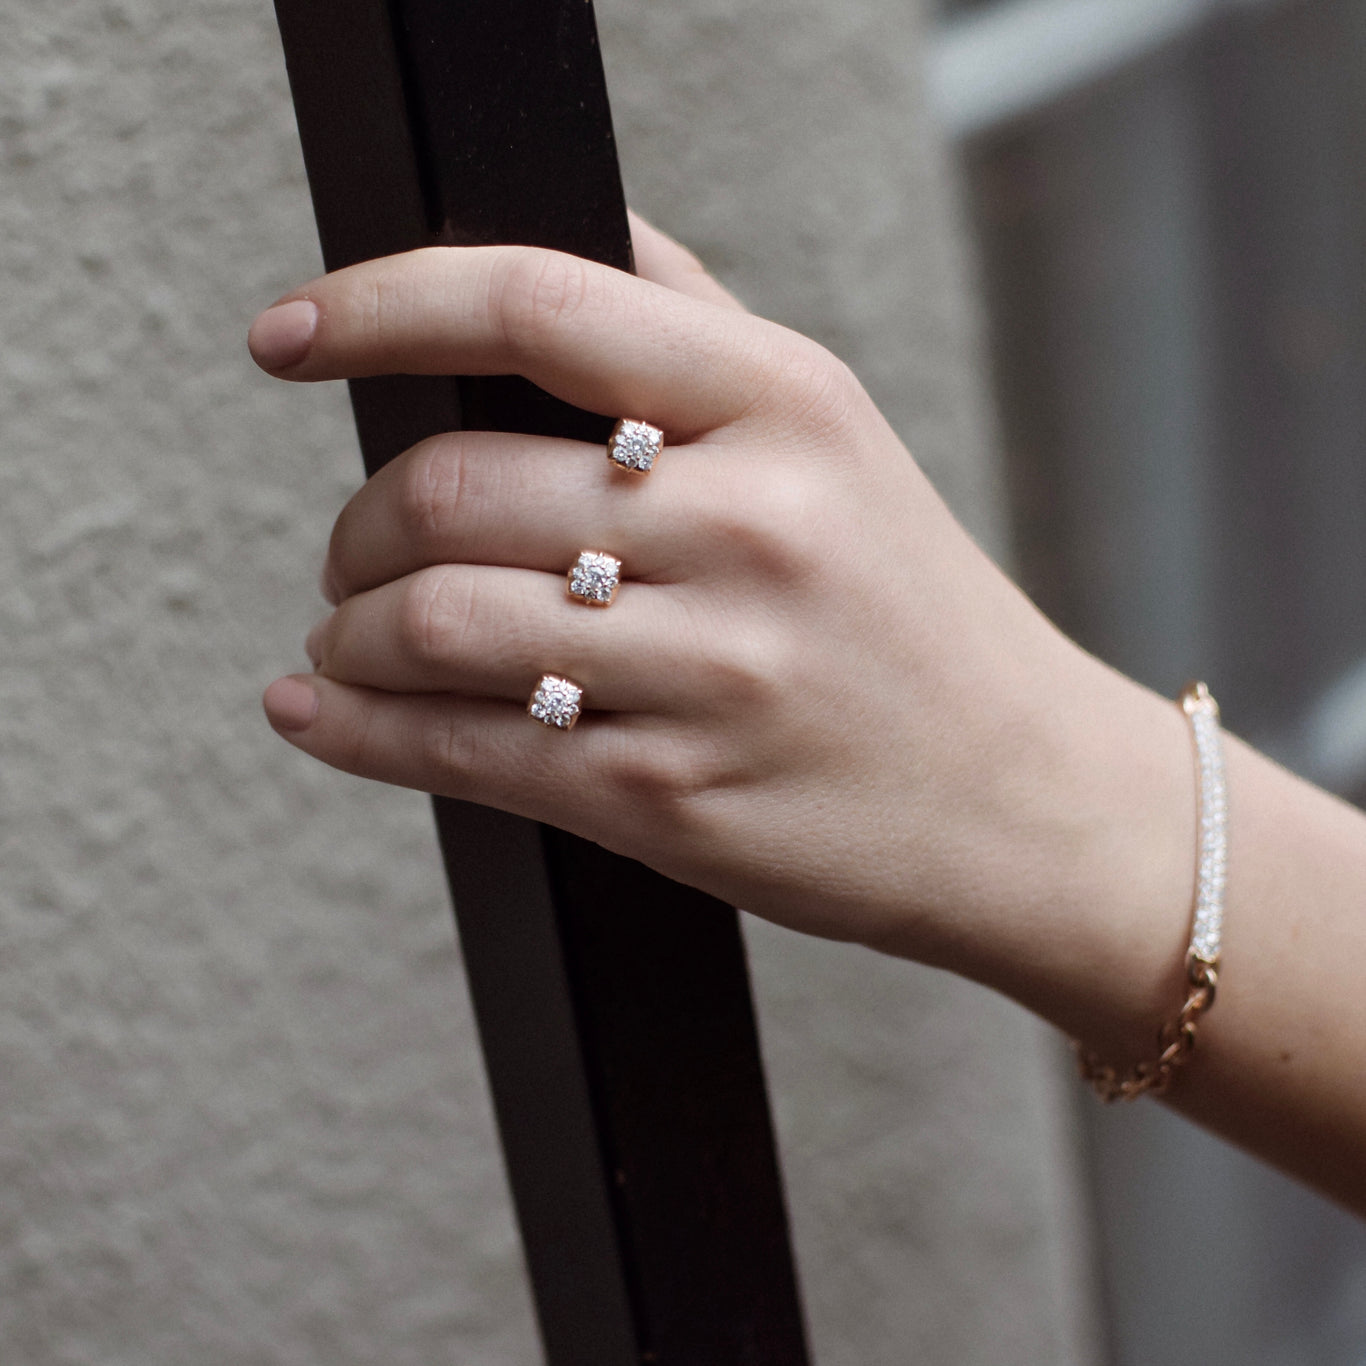 The Trilogy Ring shown with the Pantheon Bracelet.